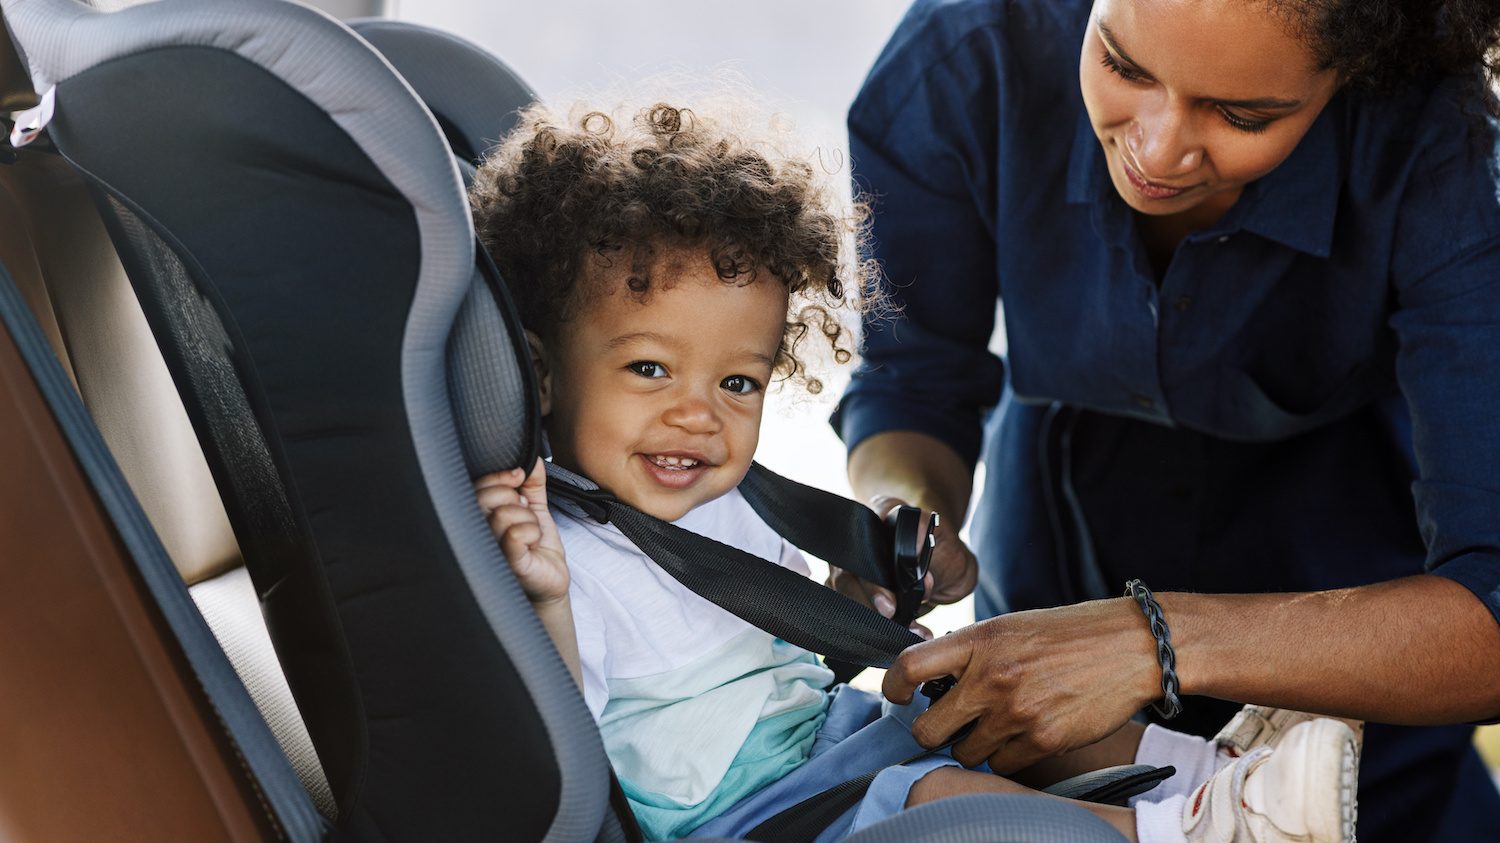 Free Car Seats Are Available To Some, Where Can I Get A Car Seat Installed For Free